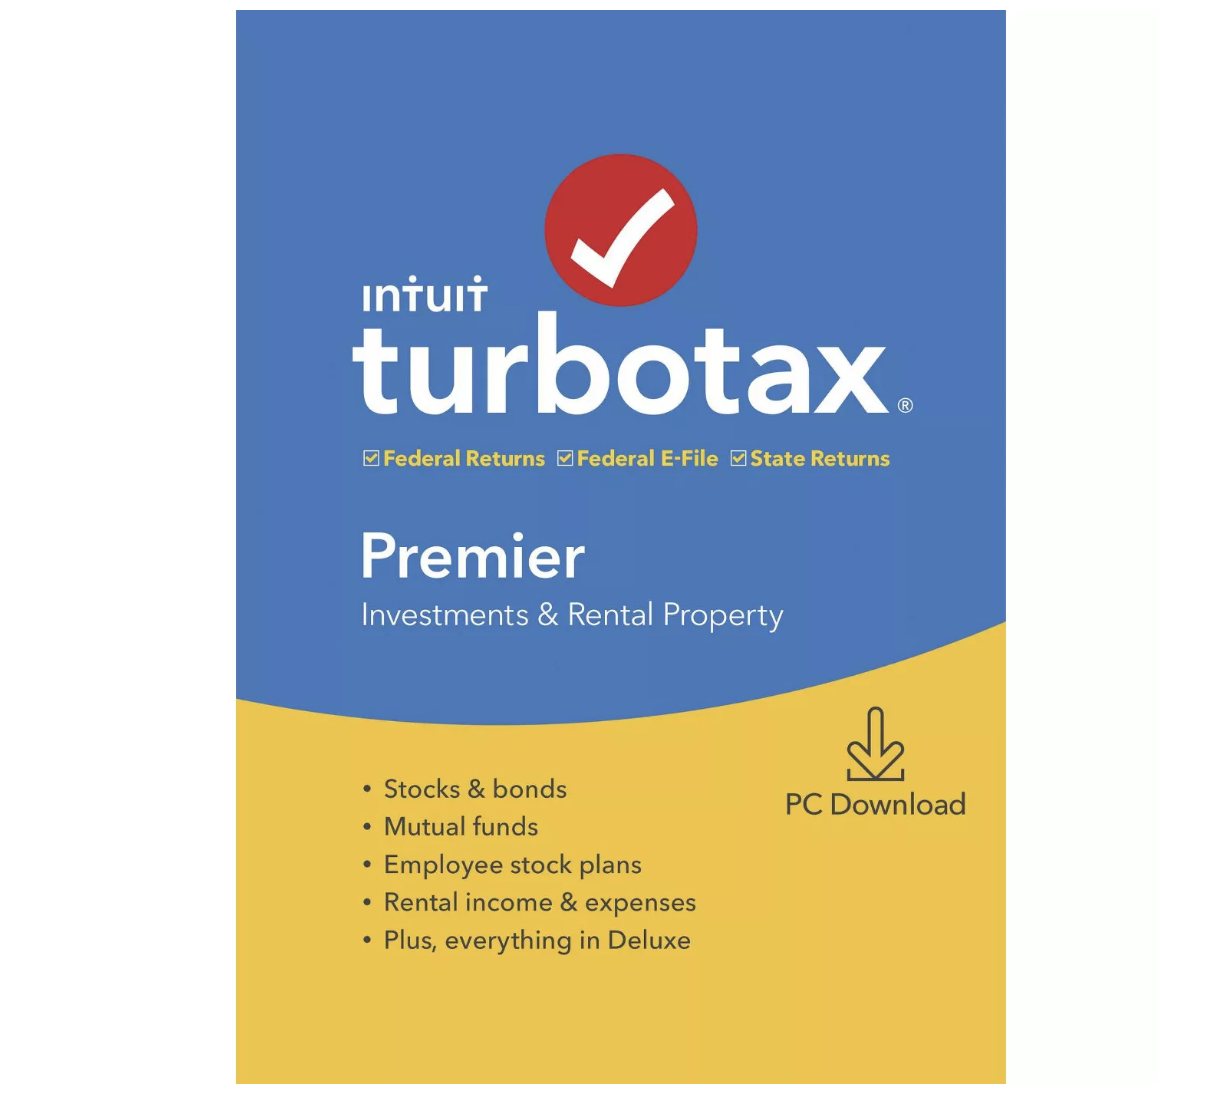 Turbotax Cost Best Deals On Tax Prep Software To File Taxes Money